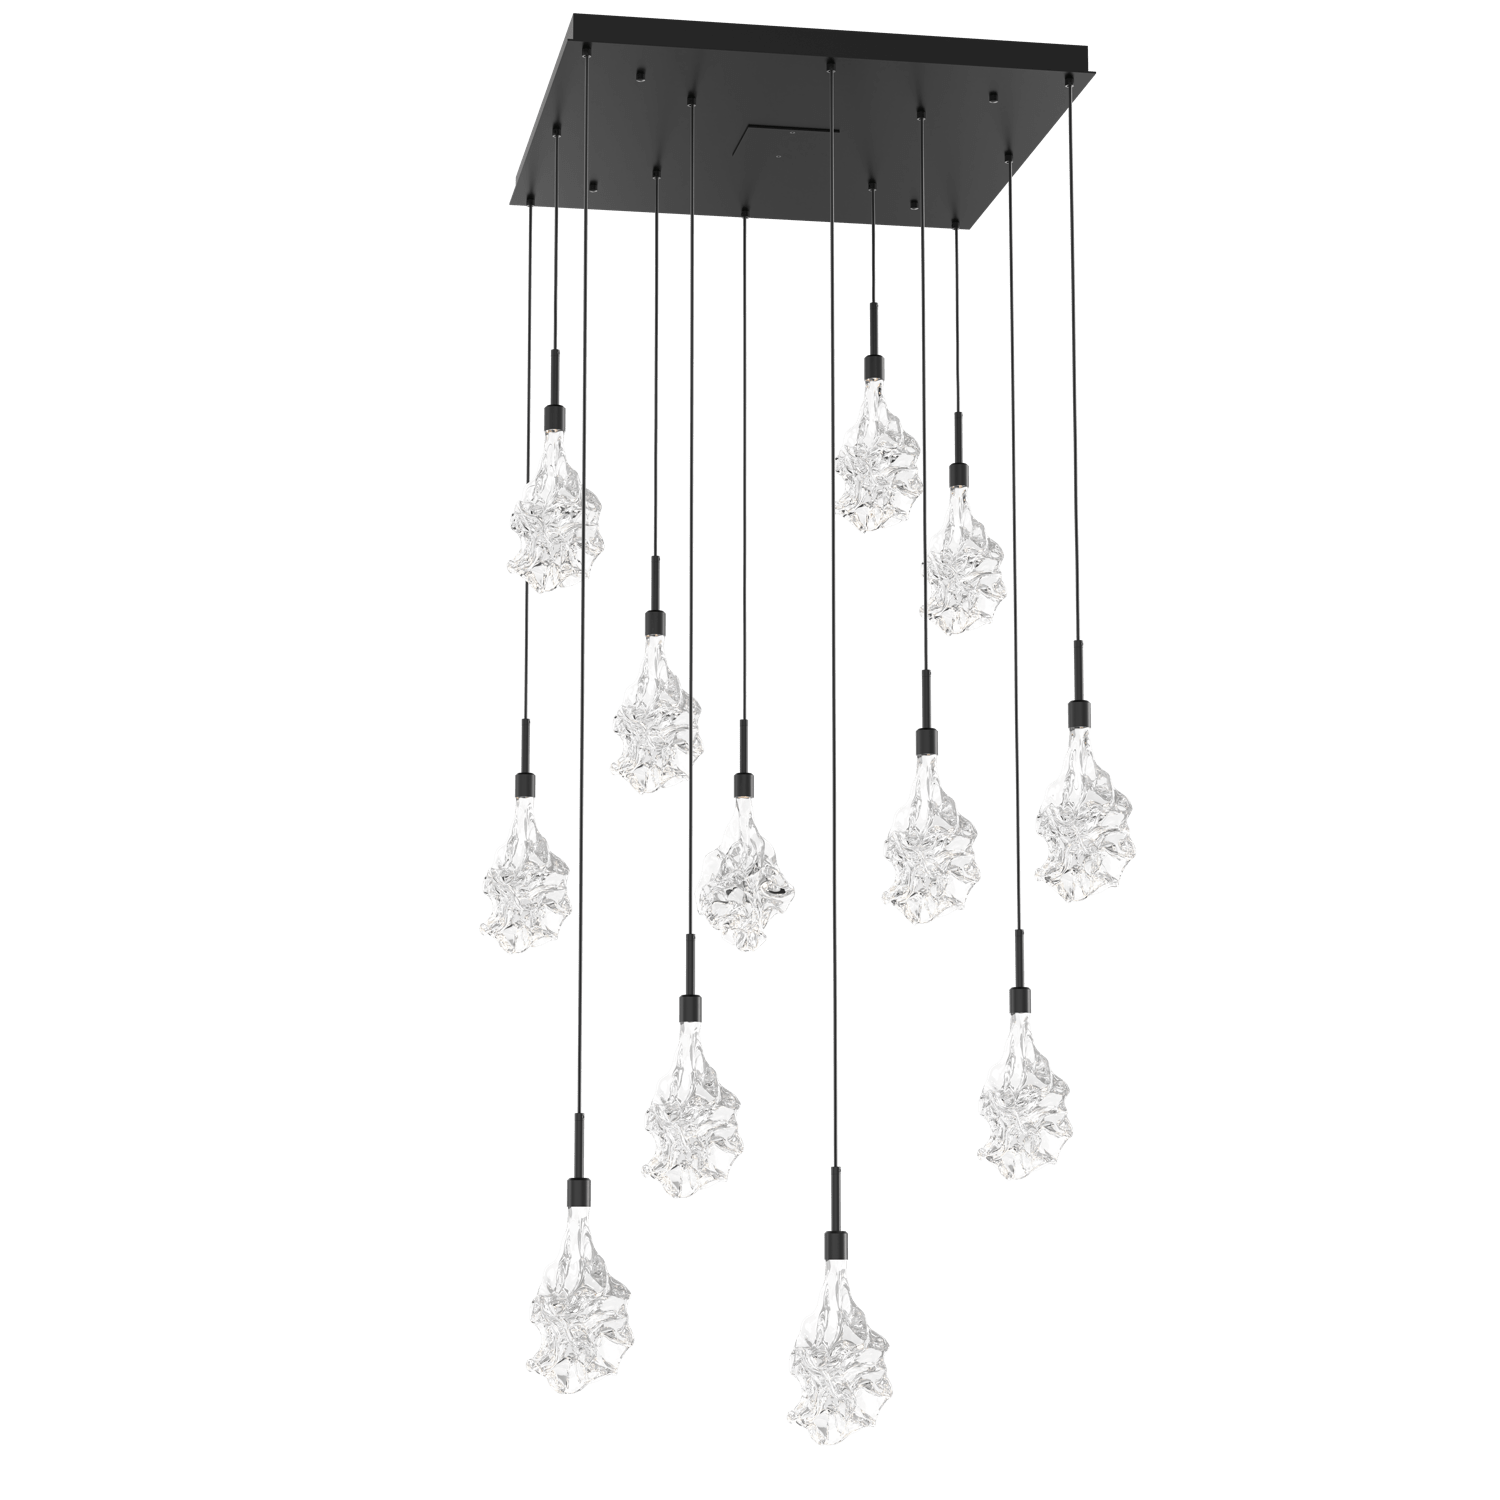 CHB0059-12-MB-Hammerton-Studio-Blossom-12-light-square-pendant-chandelier-with-matte-black-finish-and-clear-handblown-crystal-glass-shades-and-LED-lamping